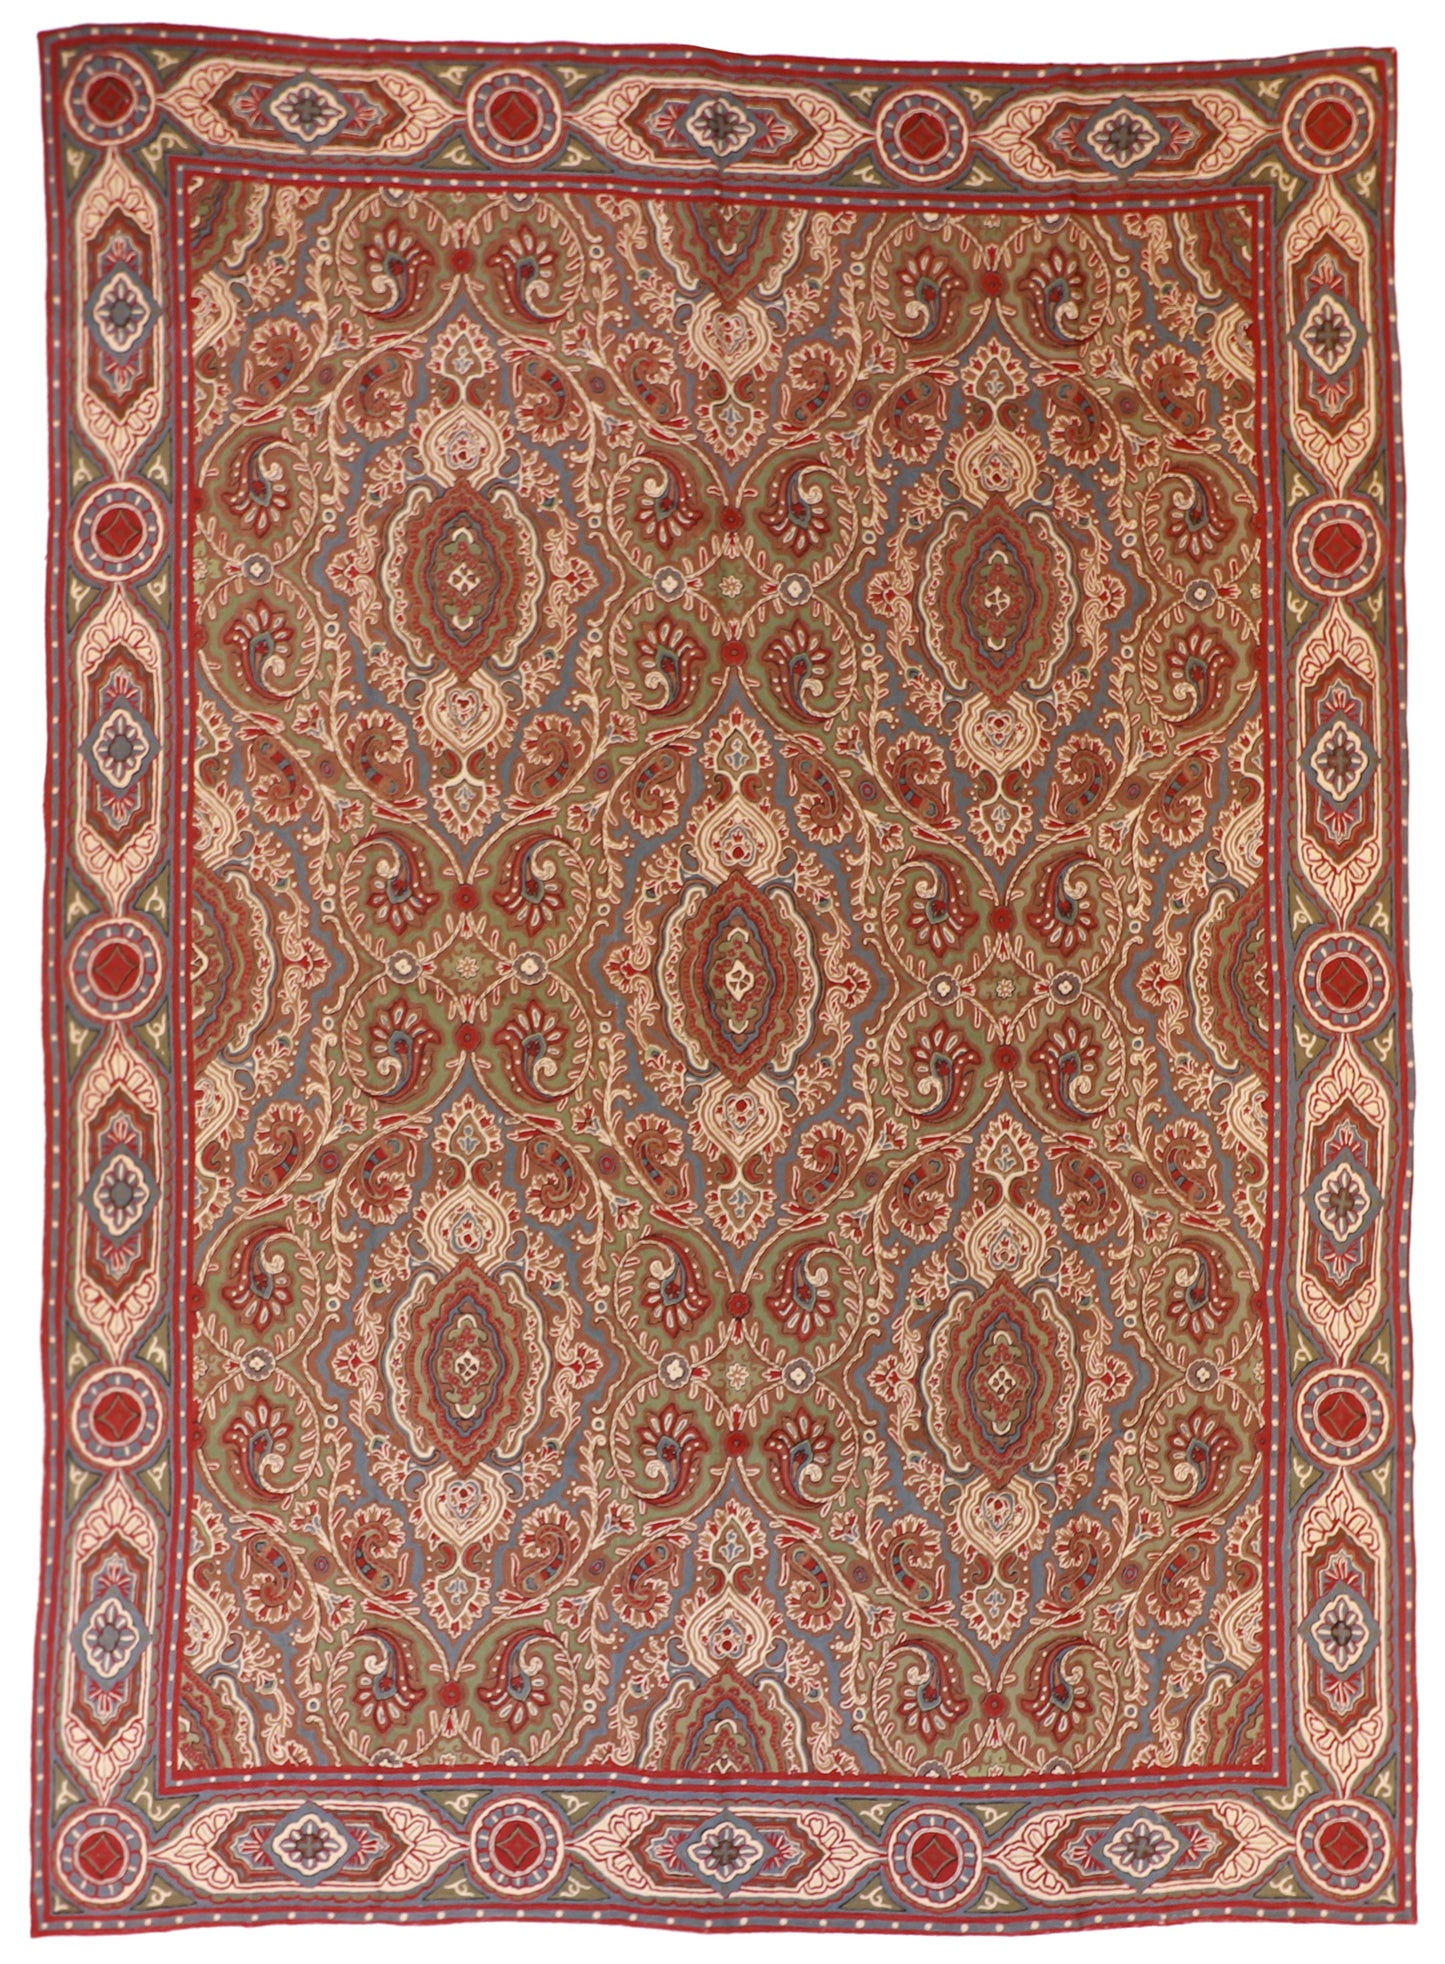 9x12 - Chainstitch Wool Floral Rectangle - Hand Knotted Rug